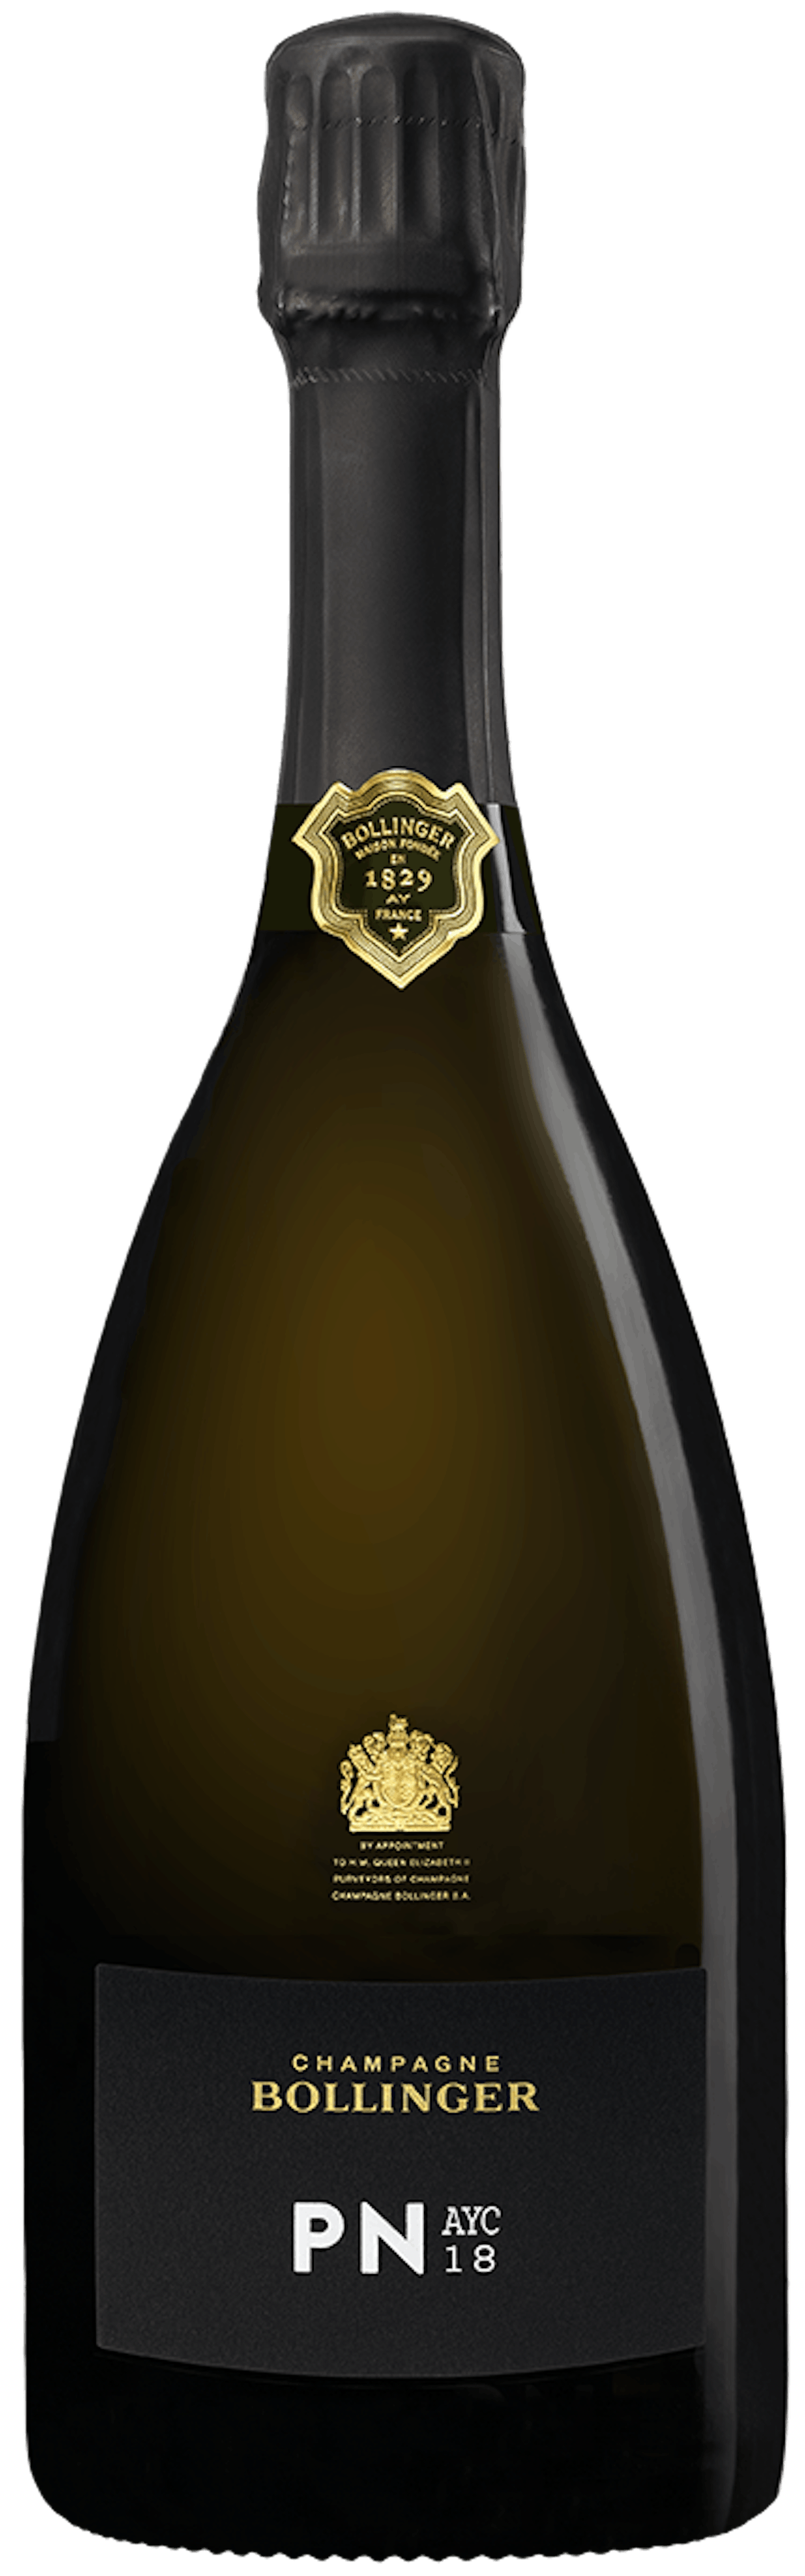 AYC Pinot Noir Champagne brut ohne Etui